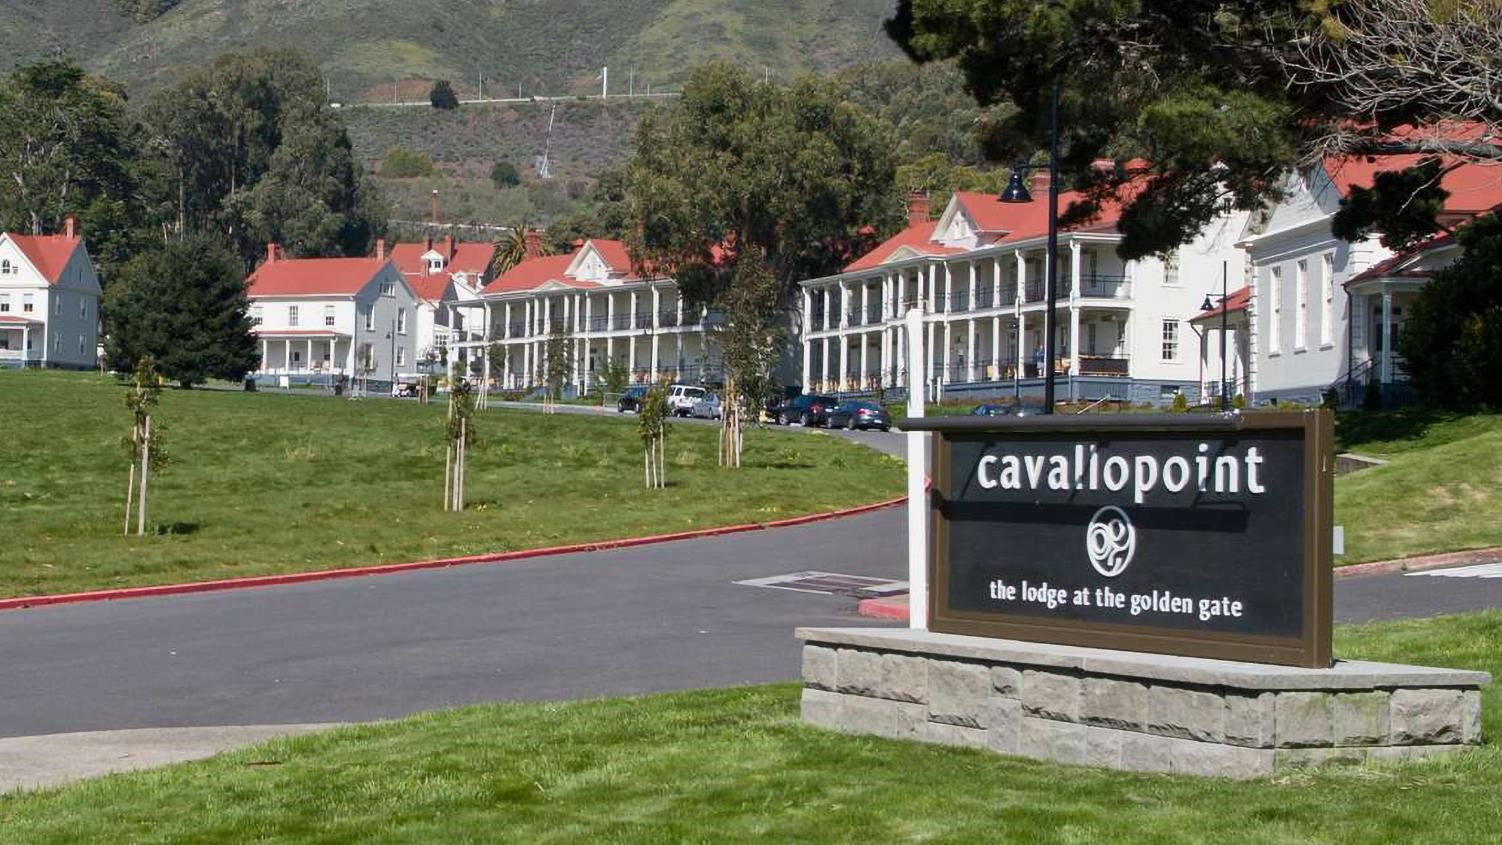 The Cavallo Point Lodge sign in a green field of grass.